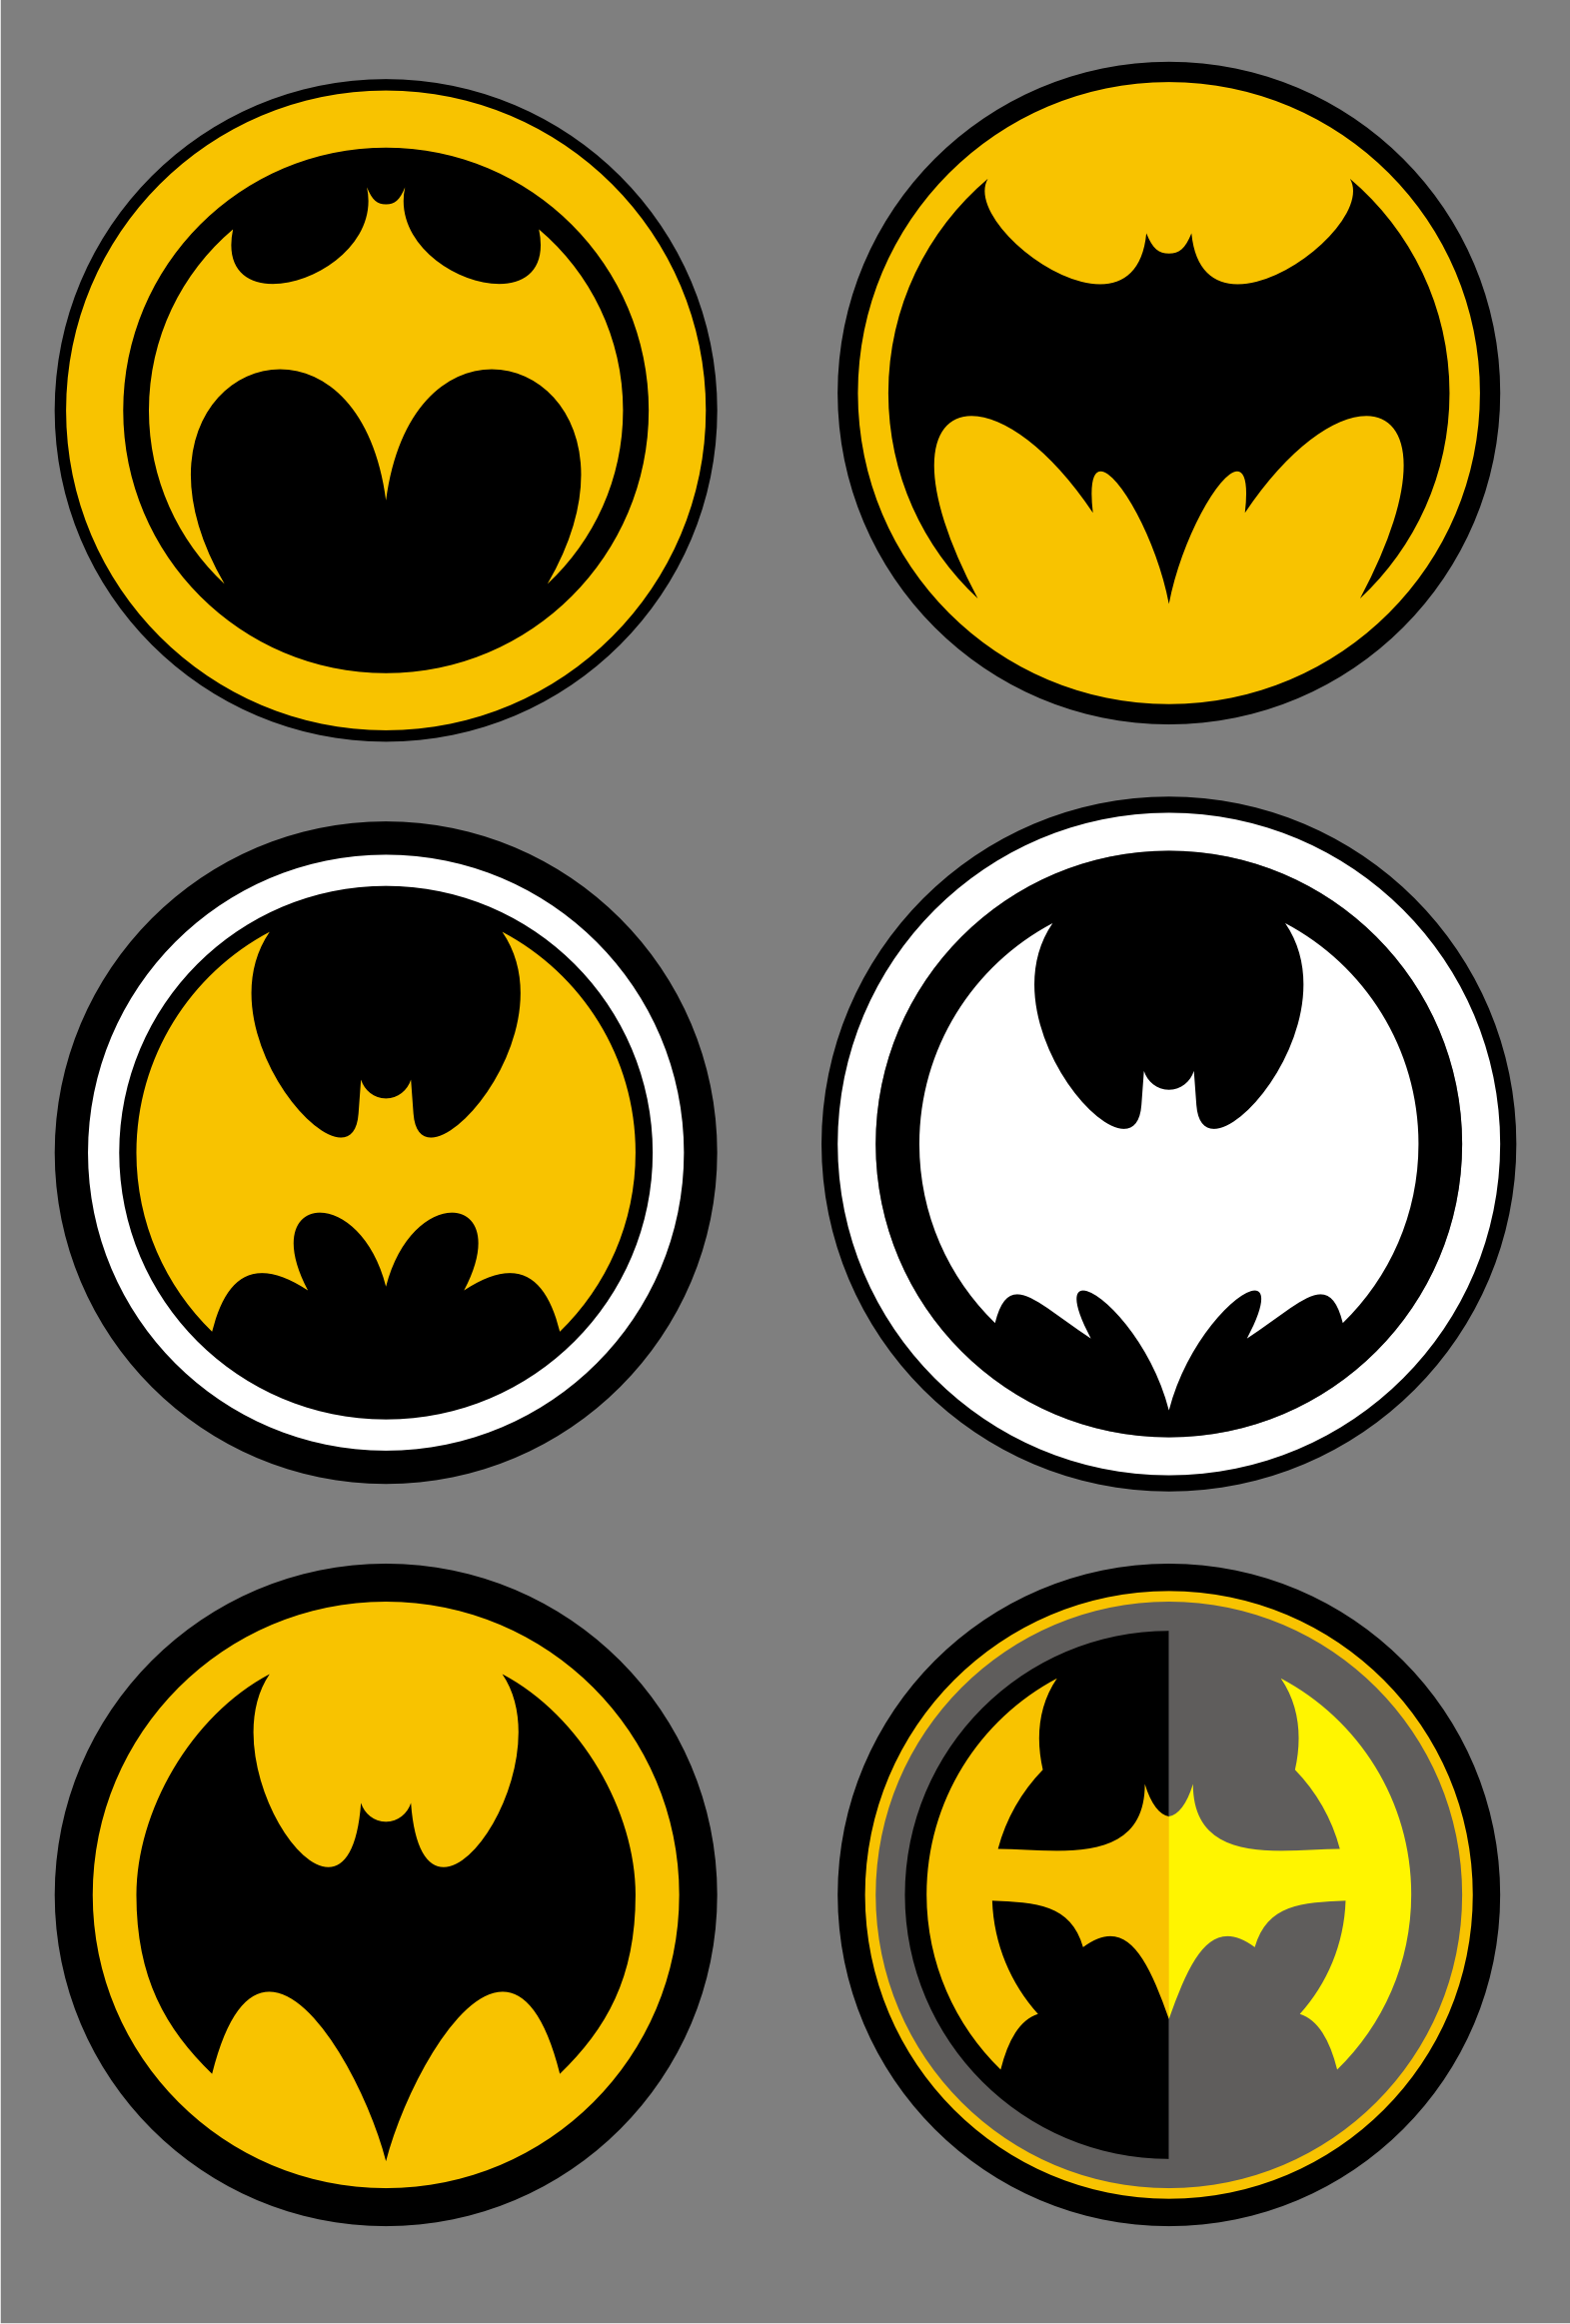 Batman Logos - Explore the Different Variations of the Iconic Symbol